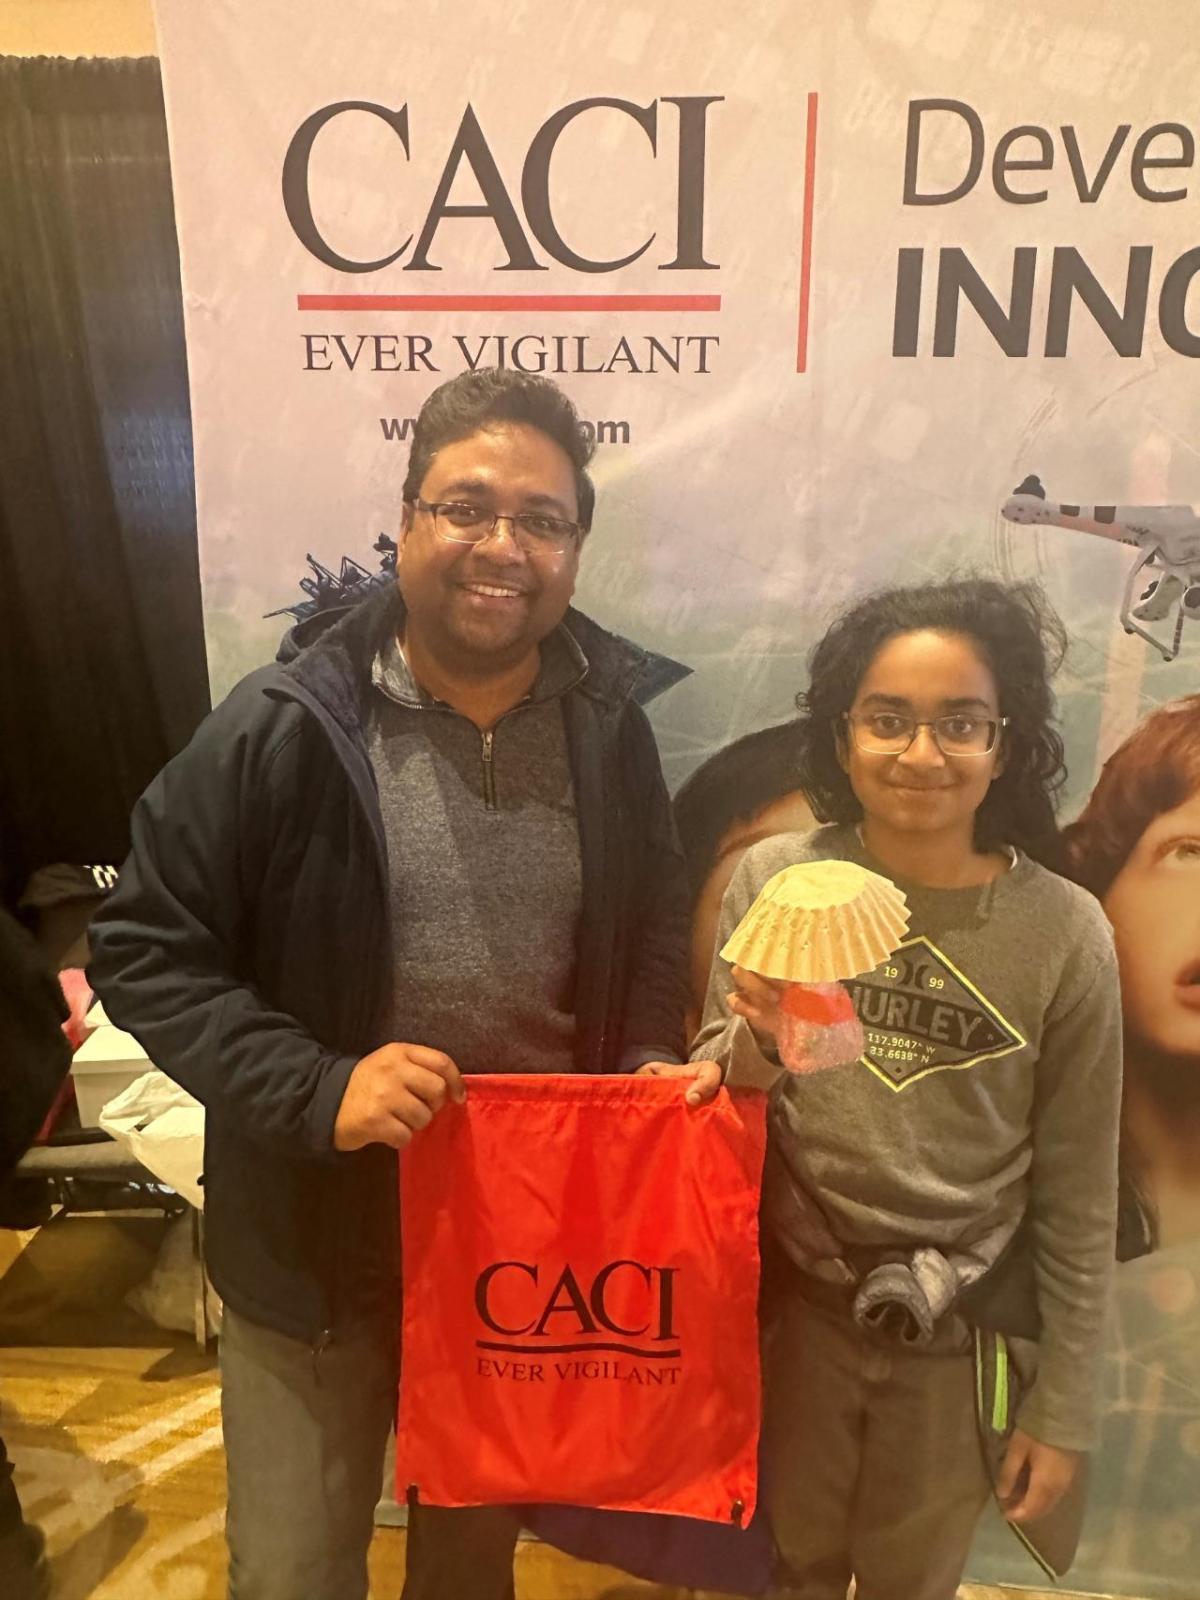 Two people in front of a CACI banner, holding up a CACI bag.